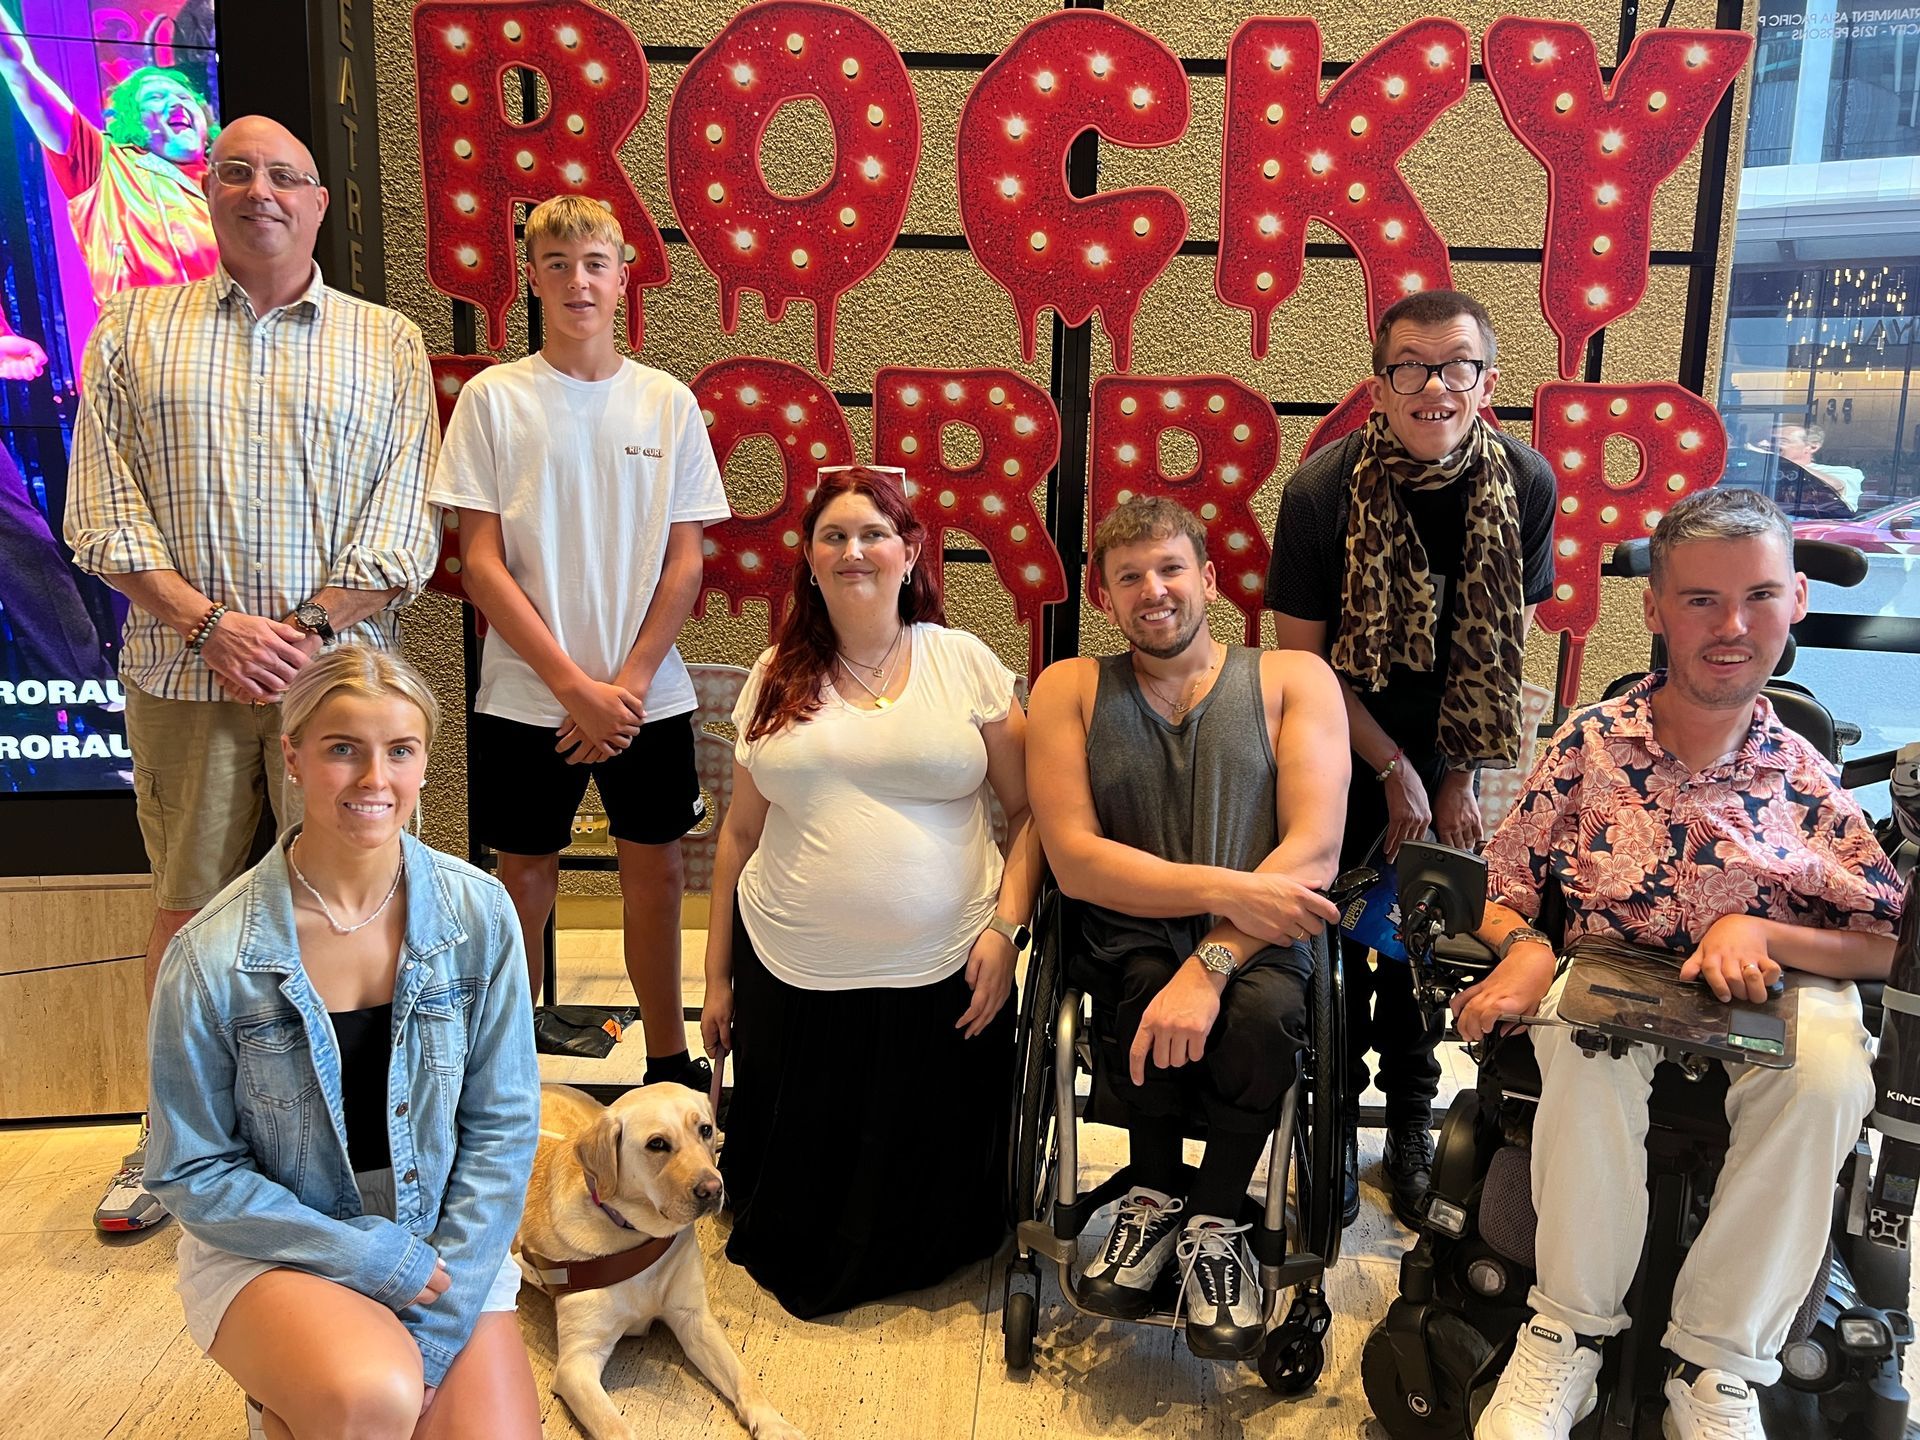 Dylan (middle) poses for a group photo with DAF recipients of varying disability in front of the red